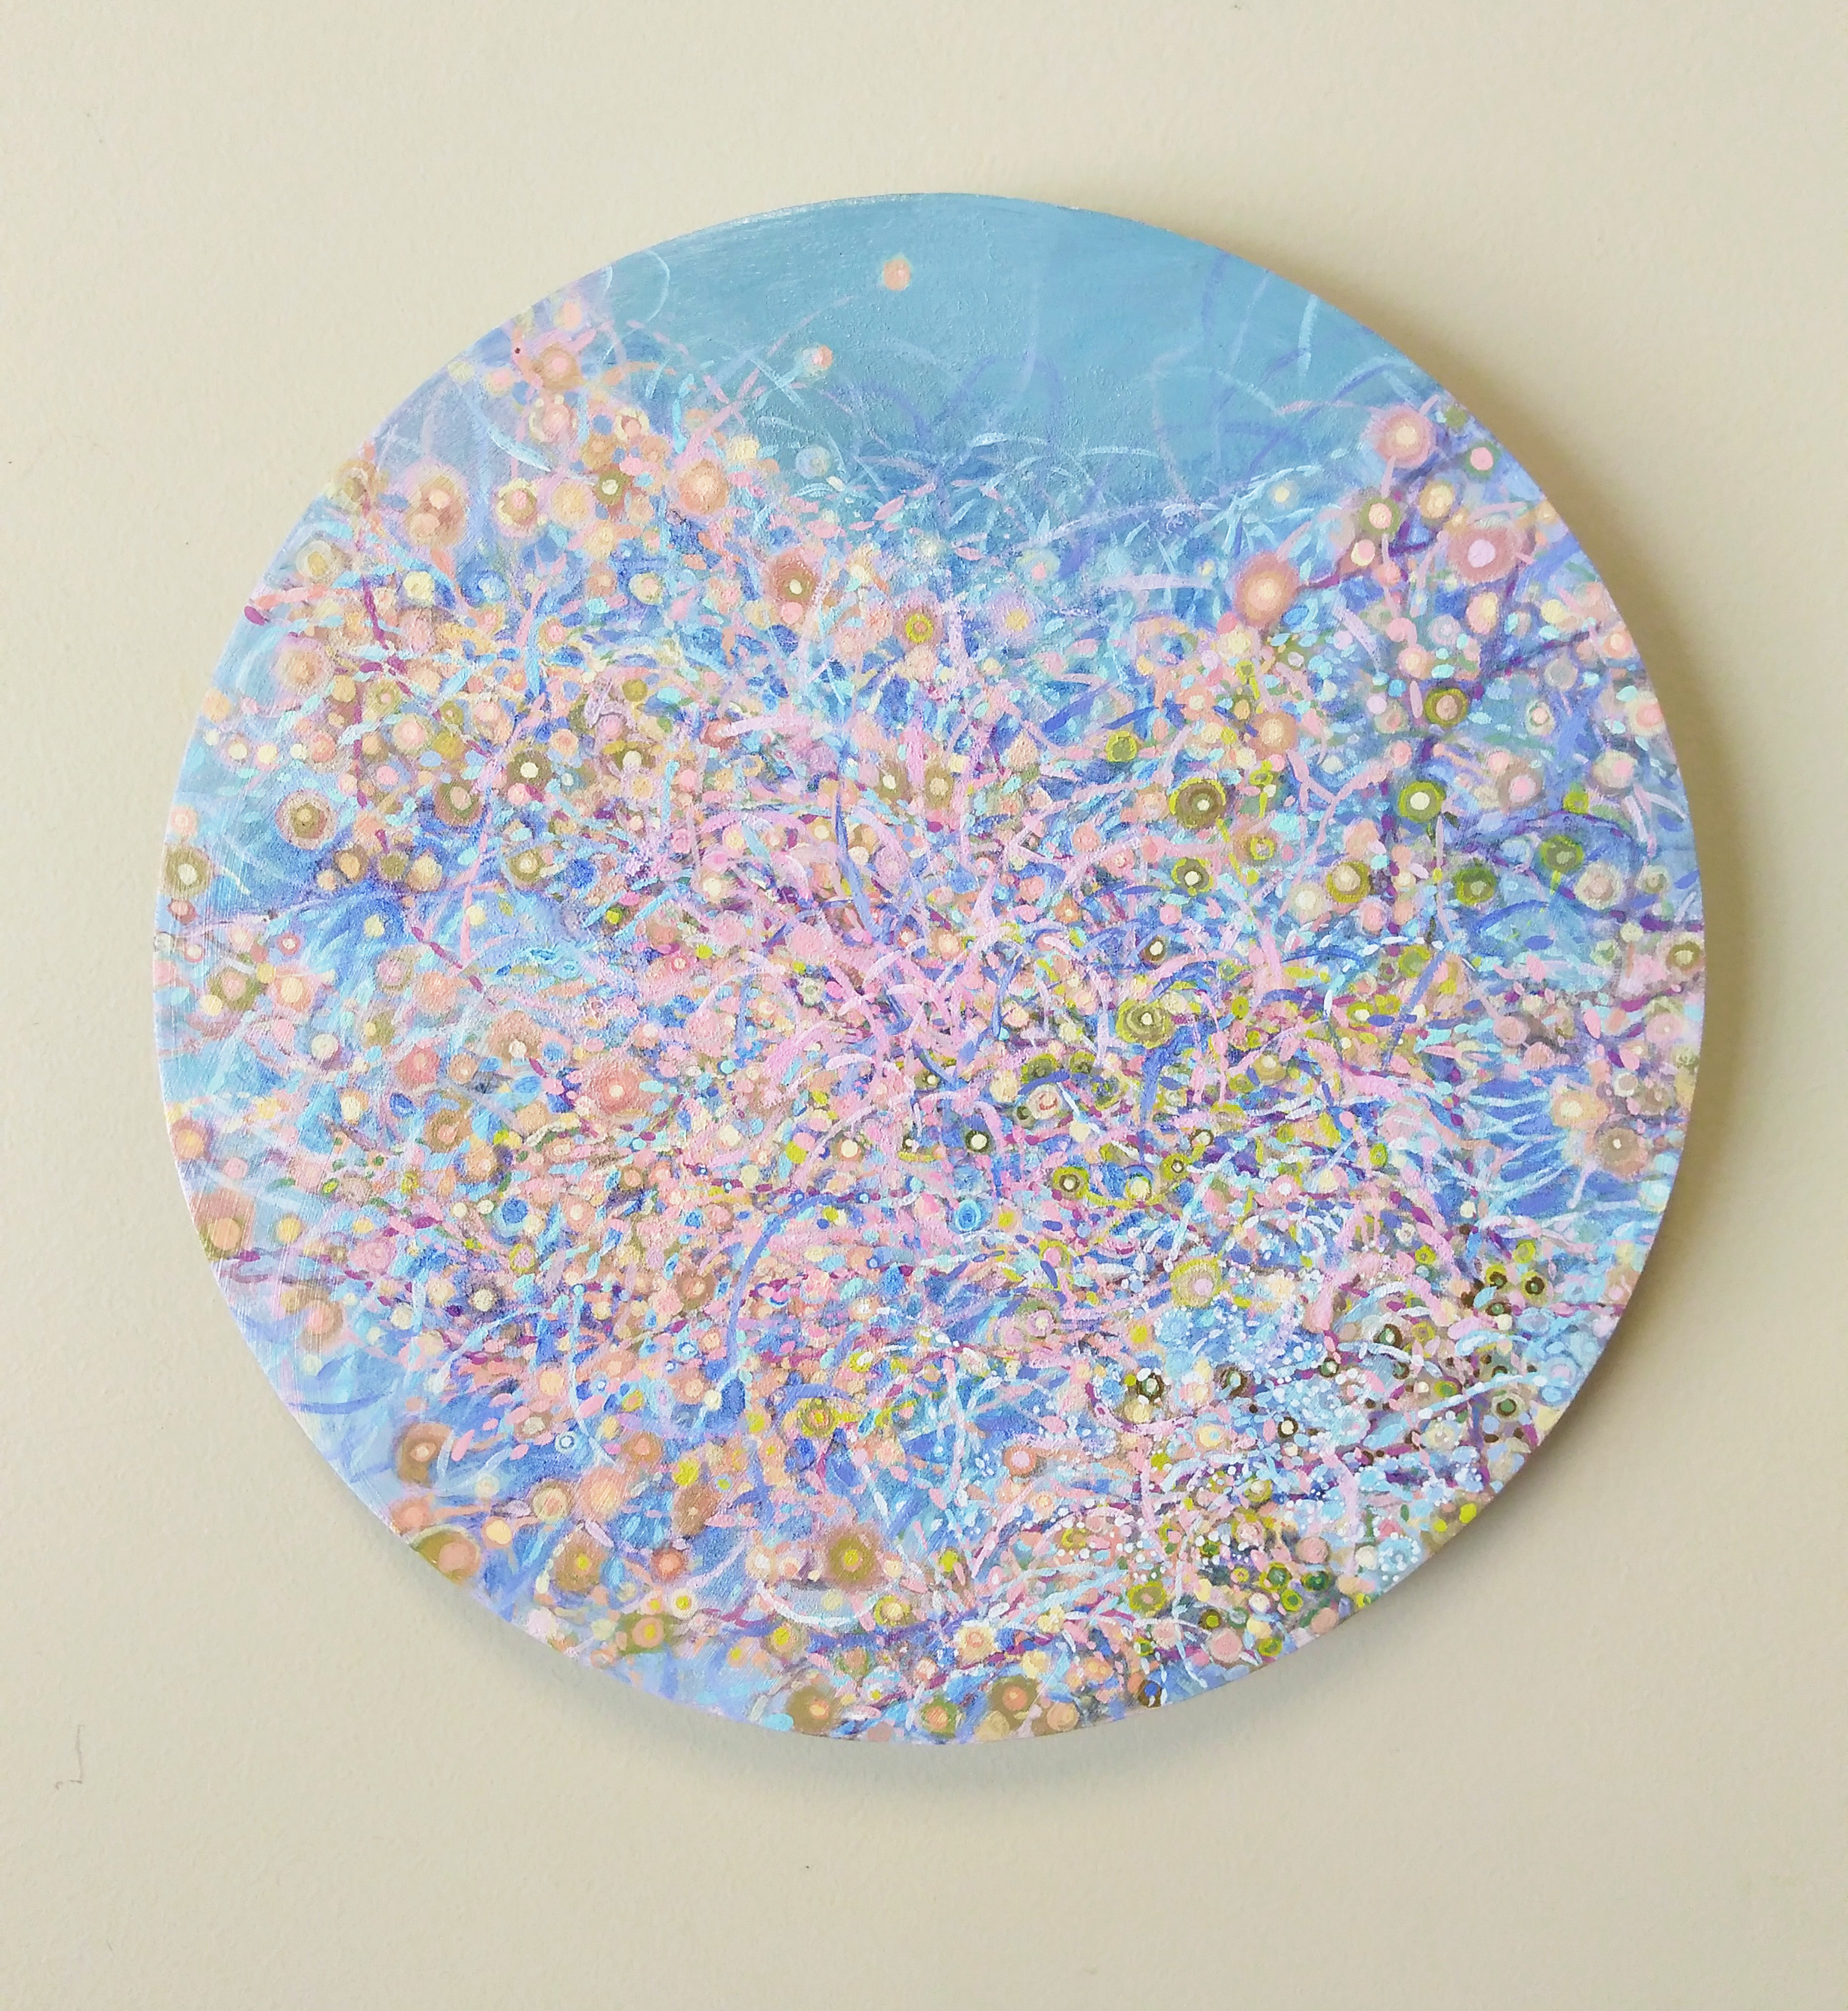  Shuling Guo  Spring 4  Acrylic on Canvas Board  Diameter: 12”  2018 